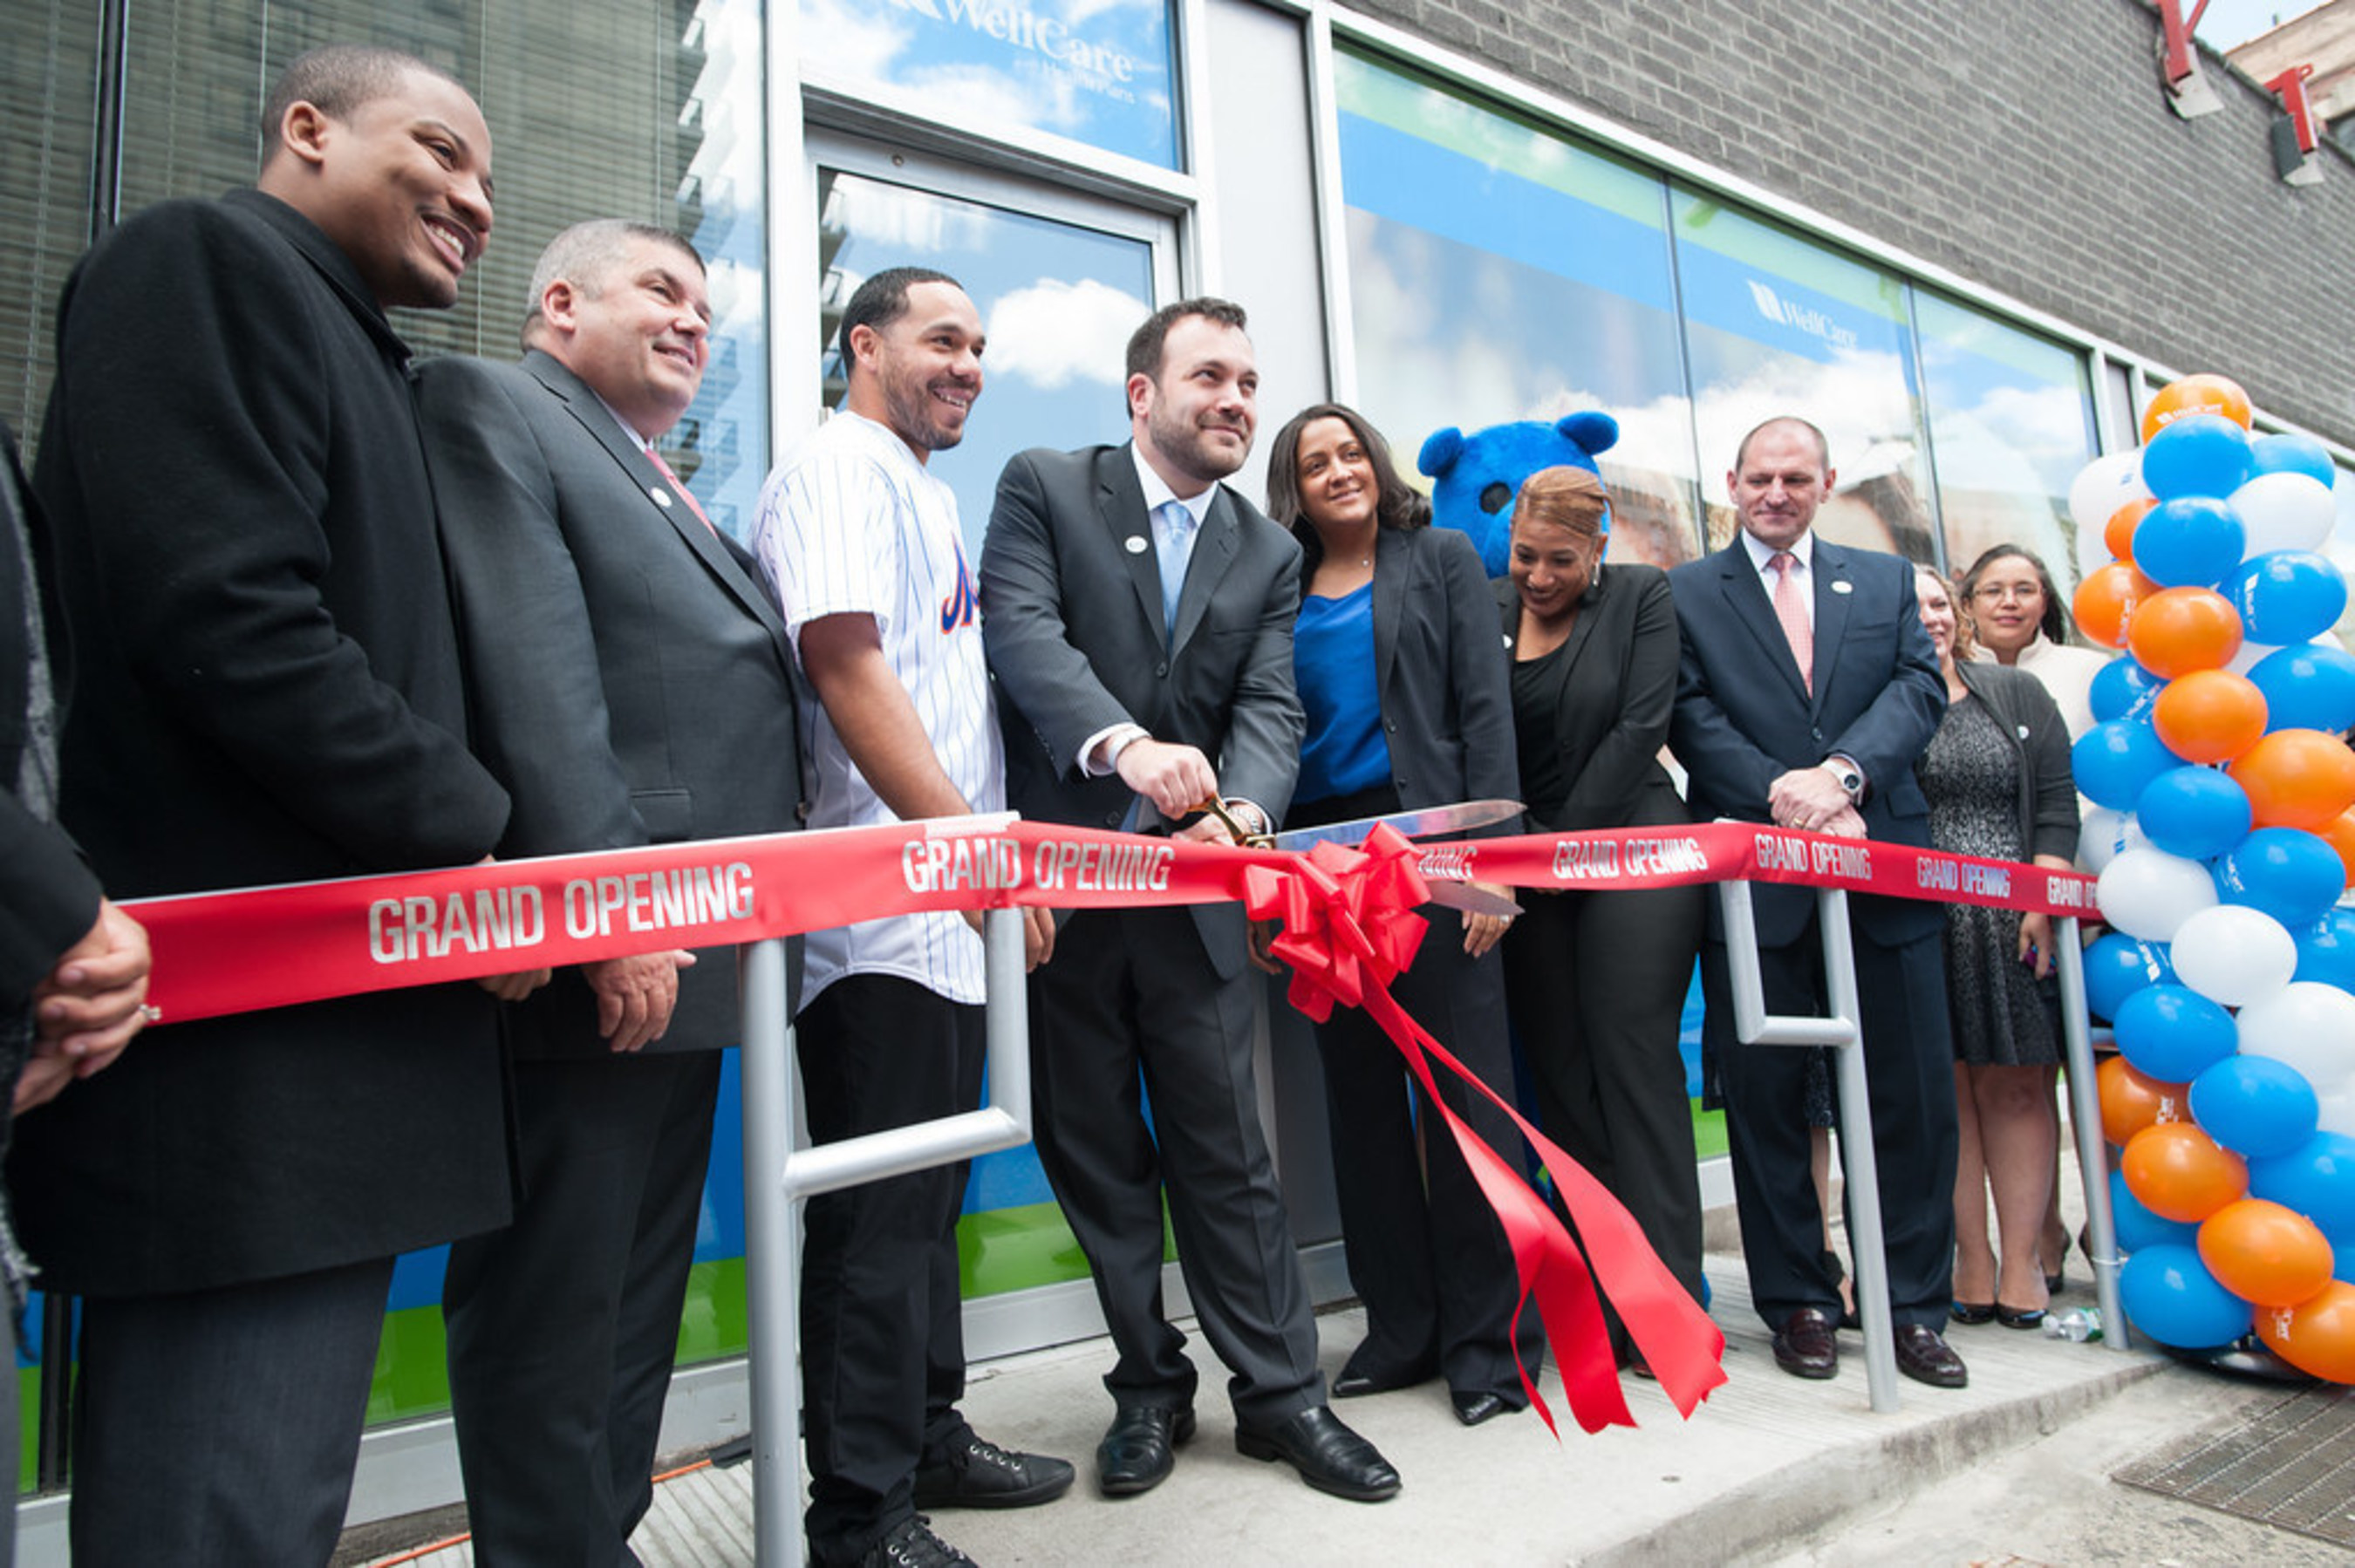 Center with scissors, Ryan Fogarty, WellCare's vice president, New York and Connecticut, cuts the ribbon to WellCare's newest Welcome Center in Manhattan's Washington Heights. To Fogarty's left is New York Mets catcher Rene Rivera, to Fogarty's right is Jeanette Gonzalez, WellCare's senior director of provider relations. WellCare Welcome Centers are neighborhood health information, education and activity centers.